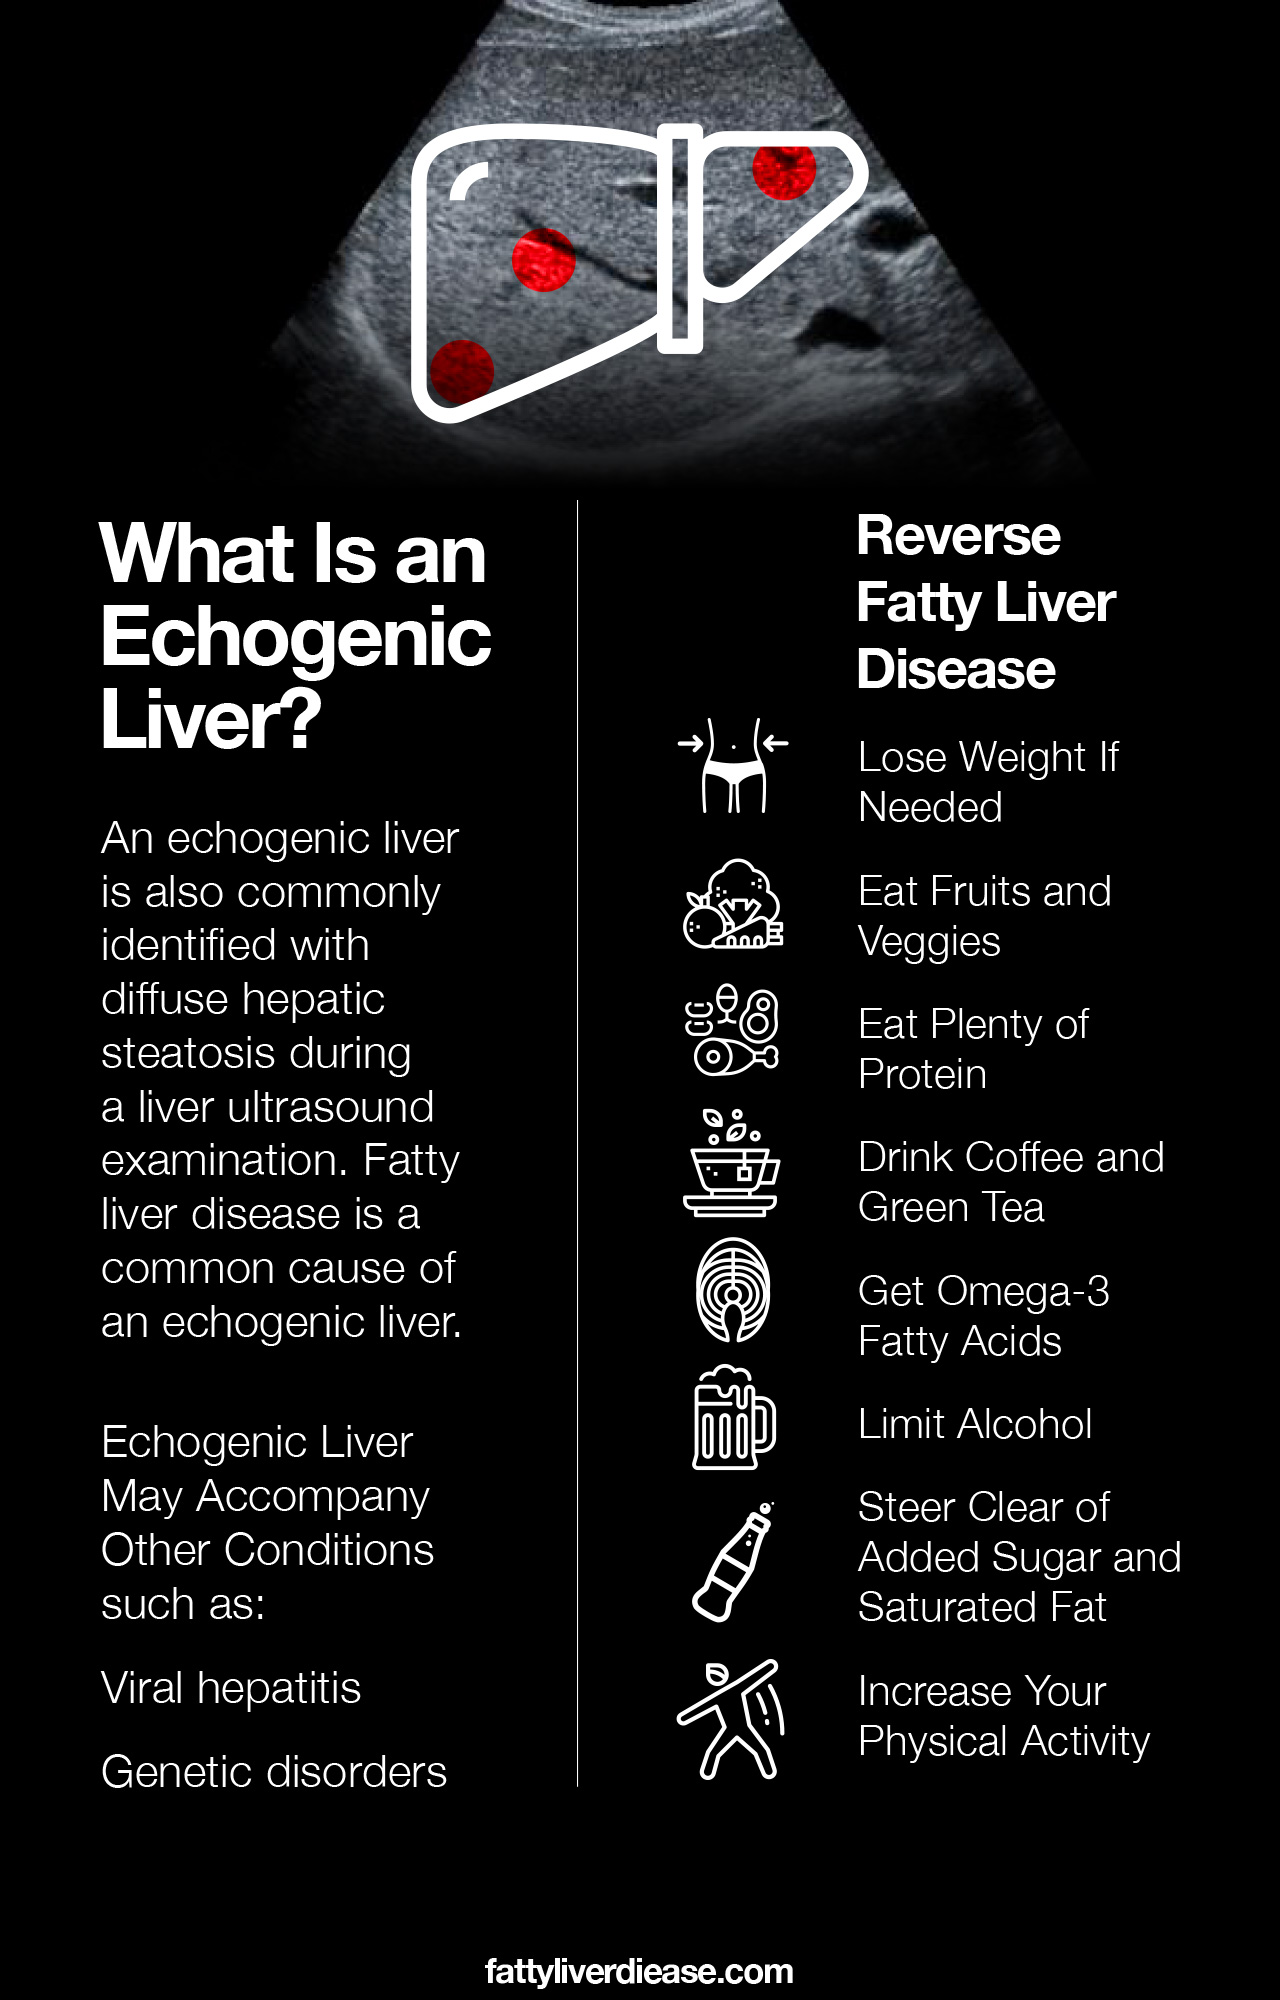 What Is an Echogenic Liver?